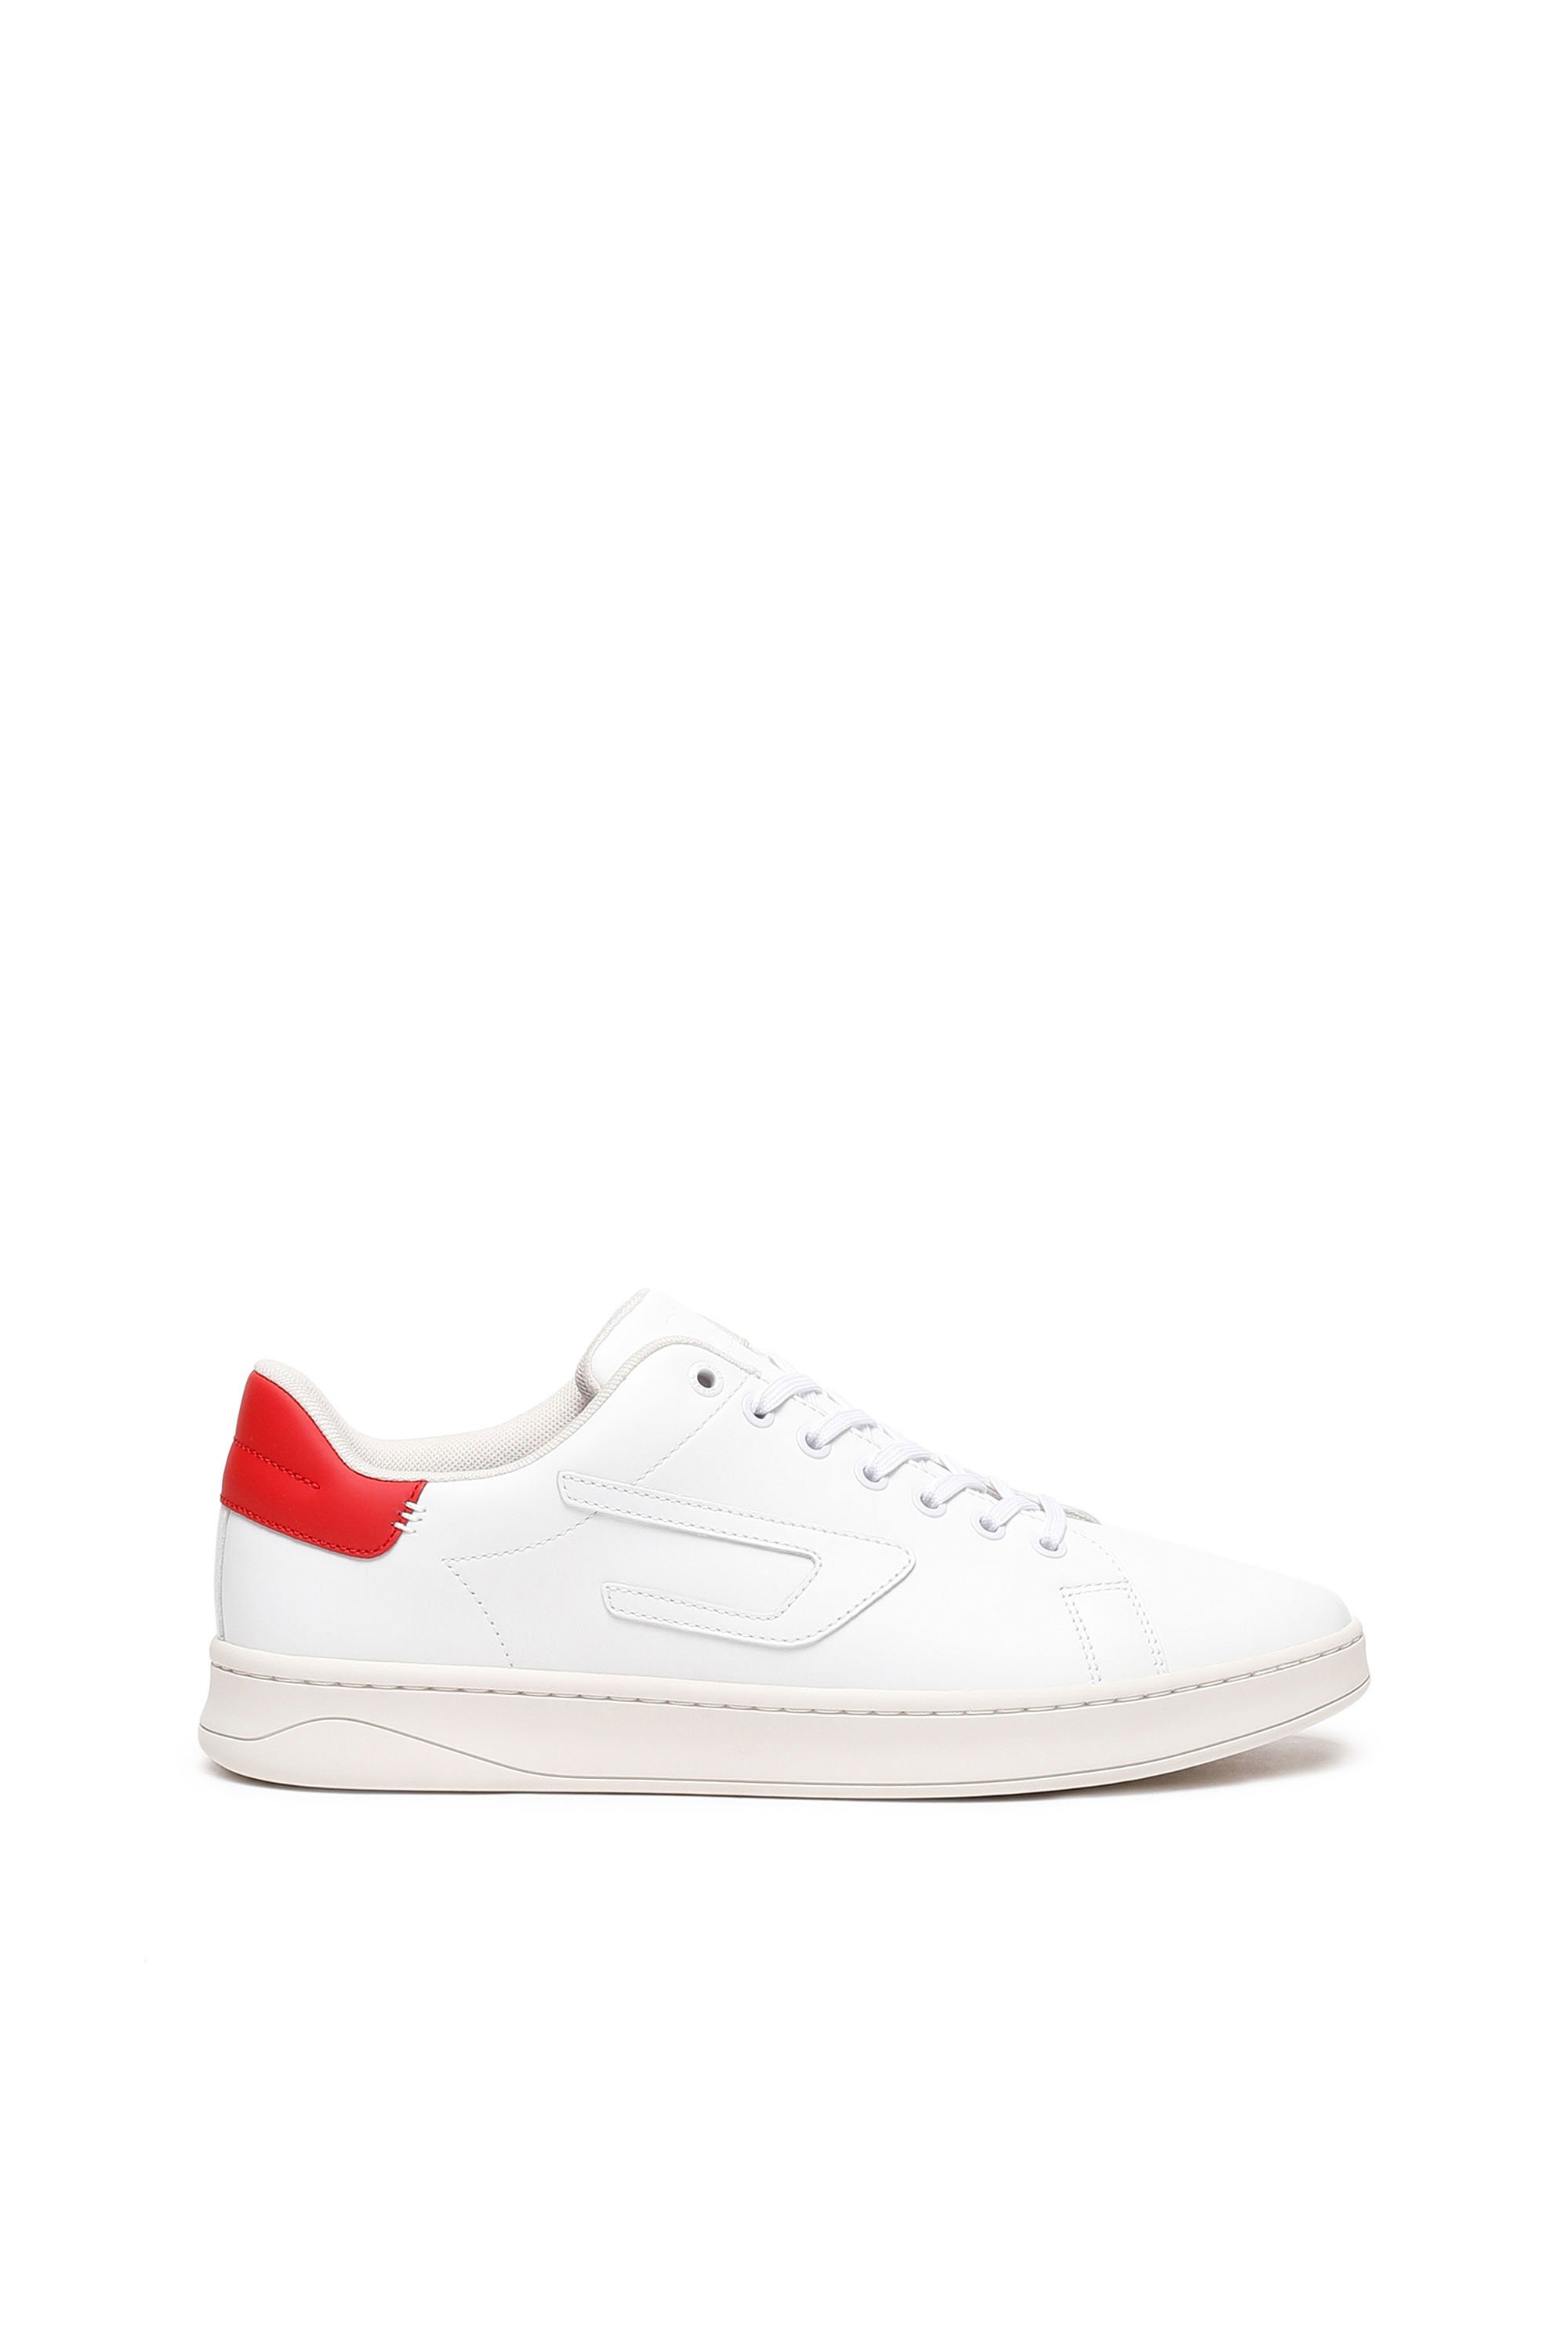 Diesel - S-ATHENE LOW, Bianco/Rosso - Image 1